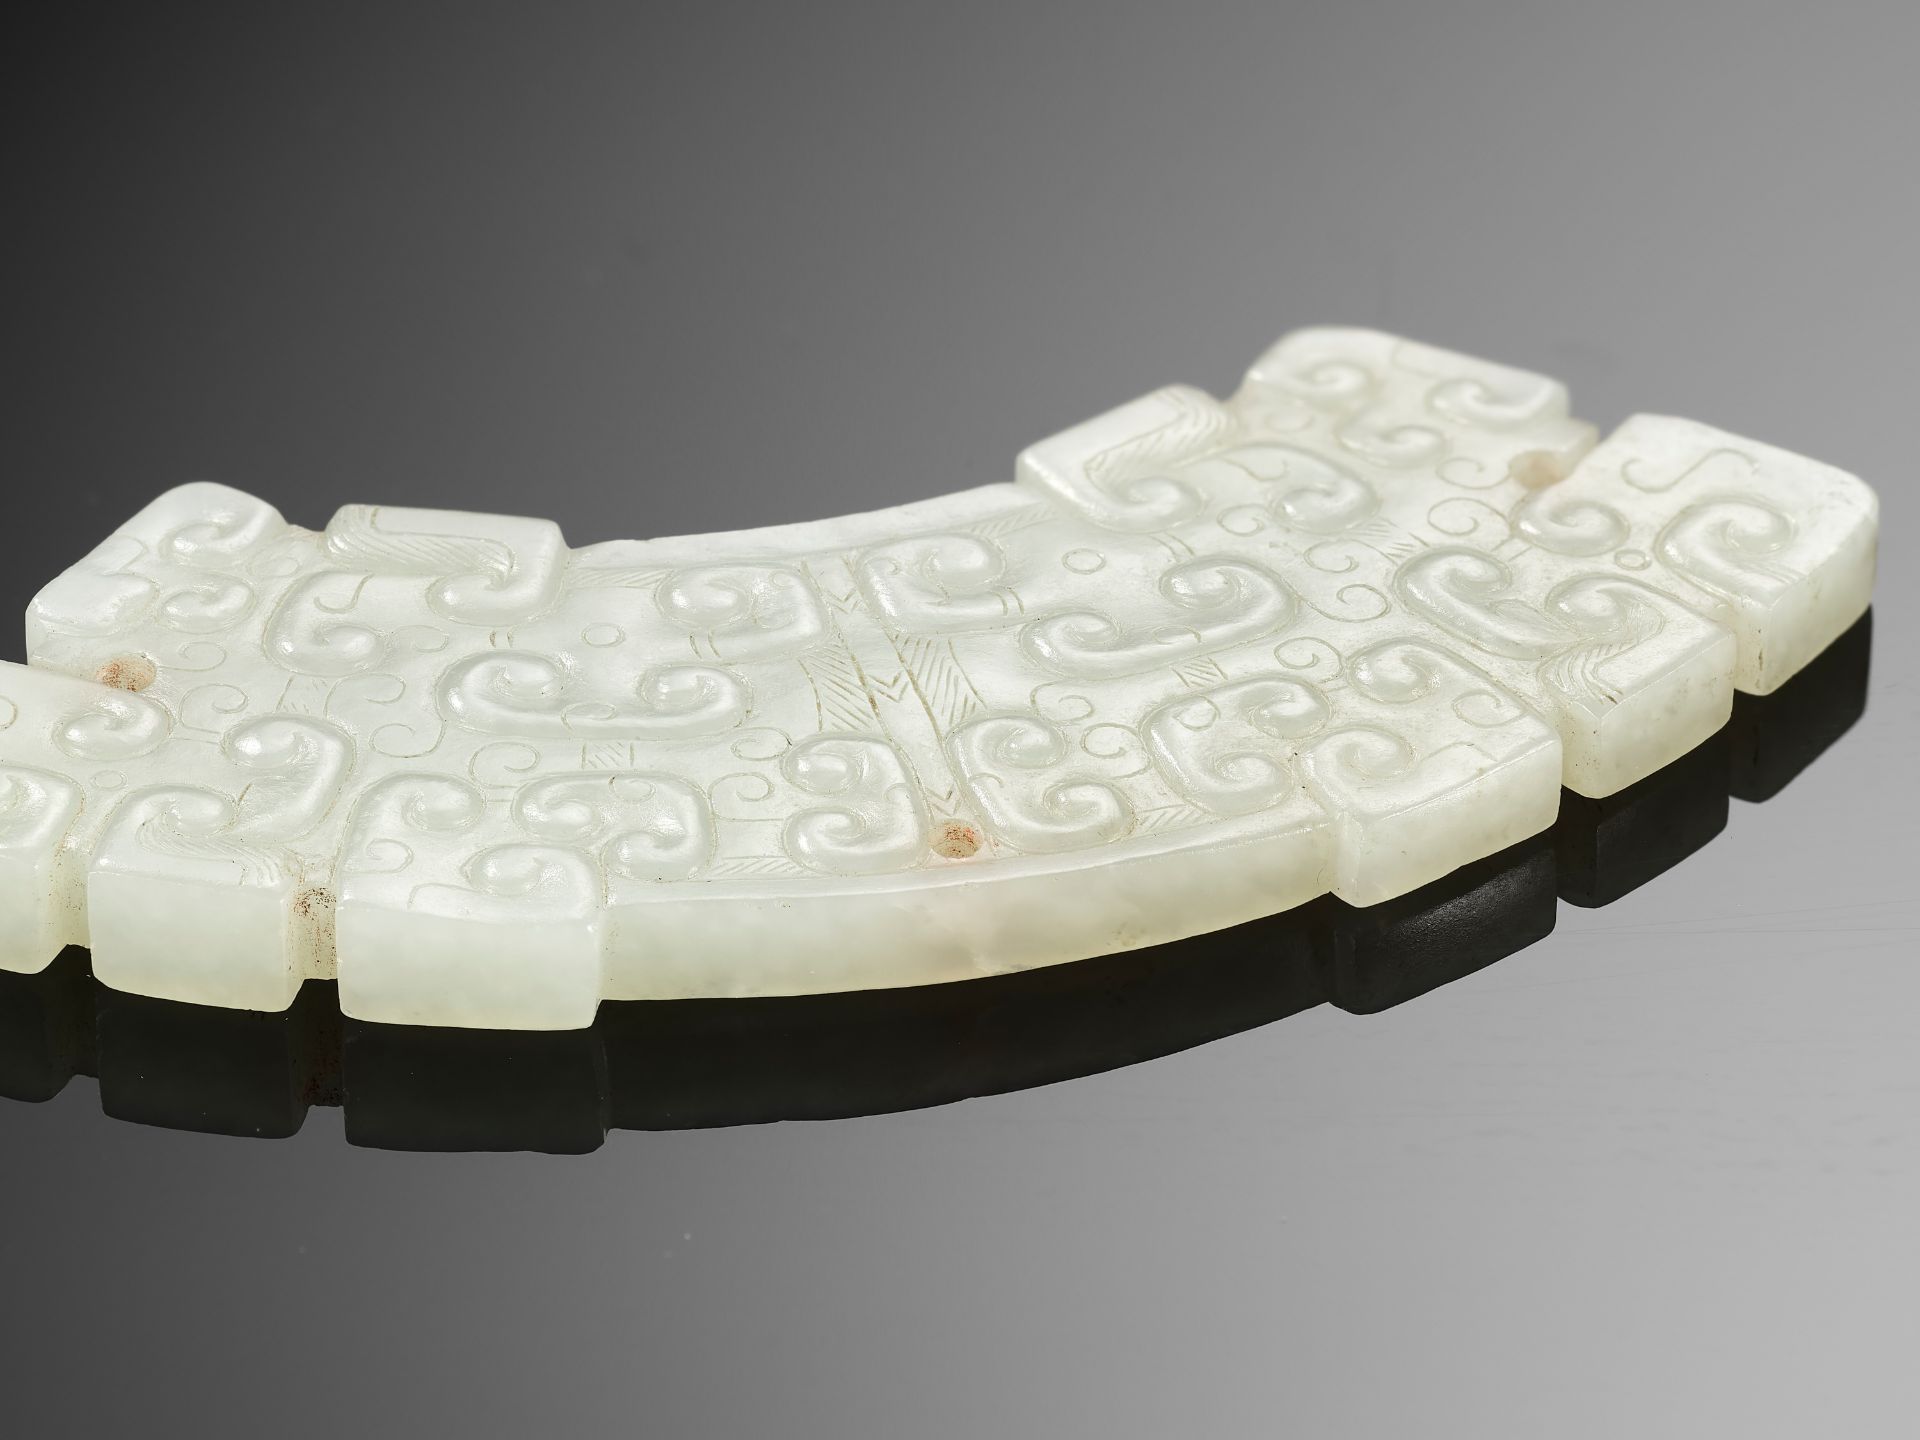 A WHITE JADE PENDANT, HUANG, EASTERN ZHOU DYNASTY - Image 8 of 8